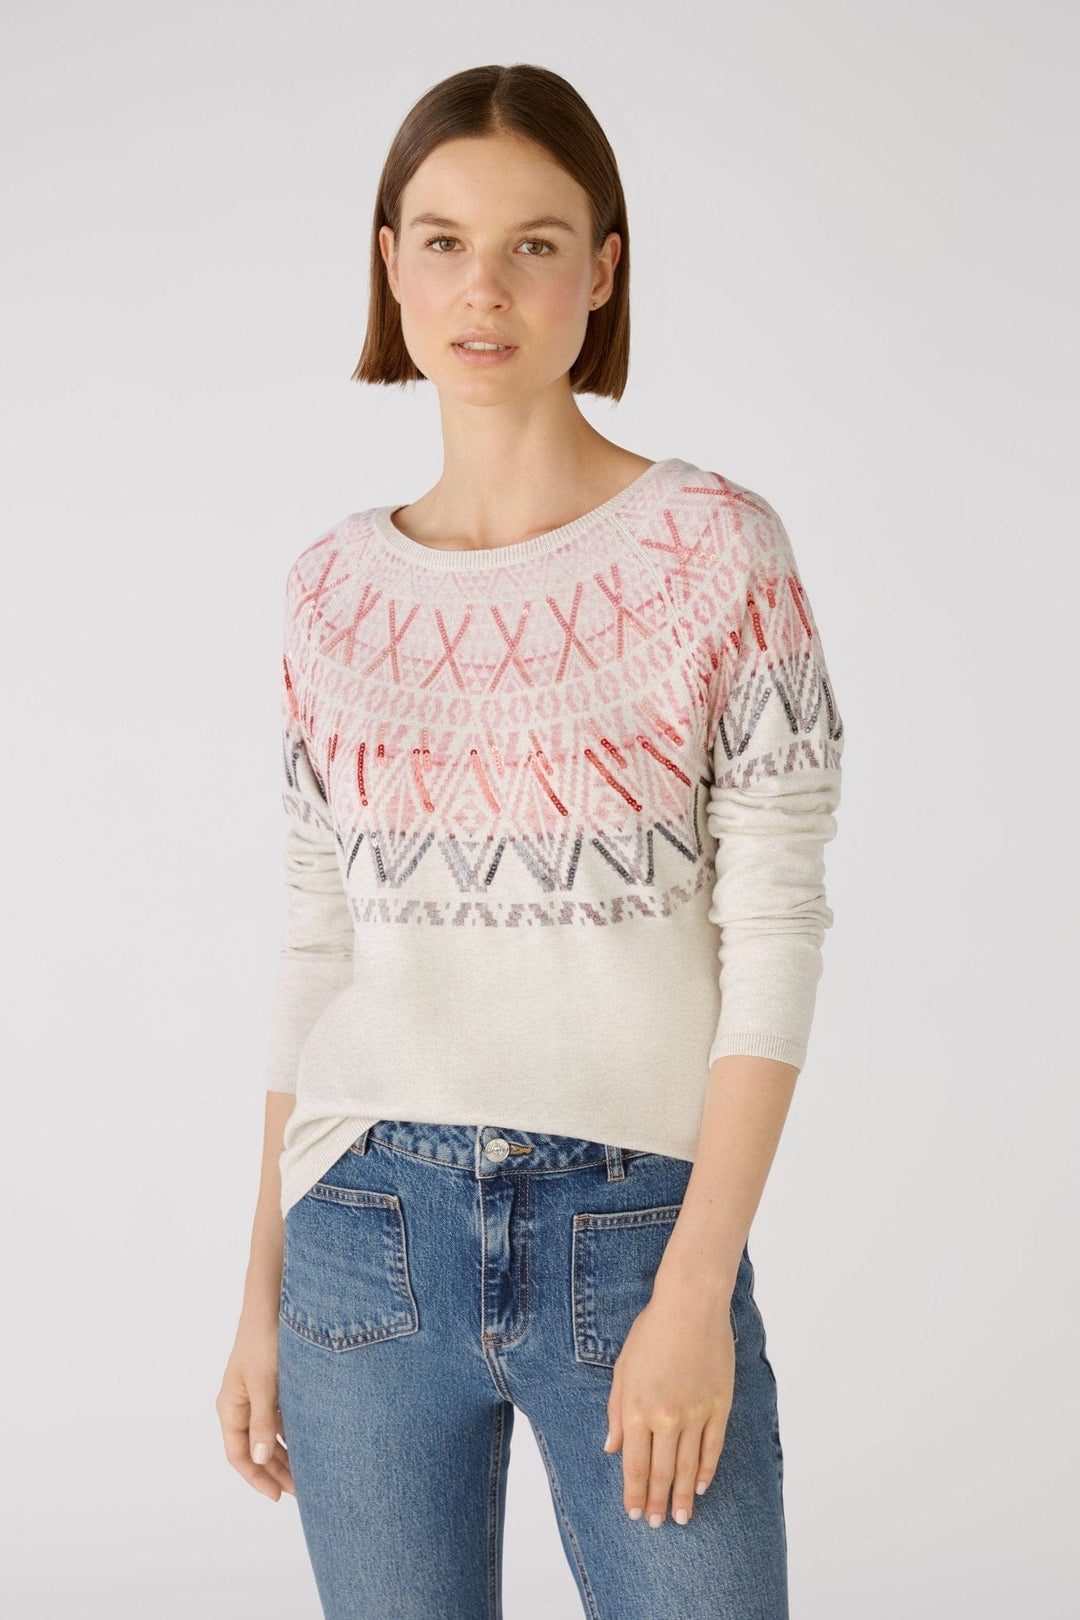 Oui Fairisle Jumper With Sequence In Cream Multi - Crabtree Cottage